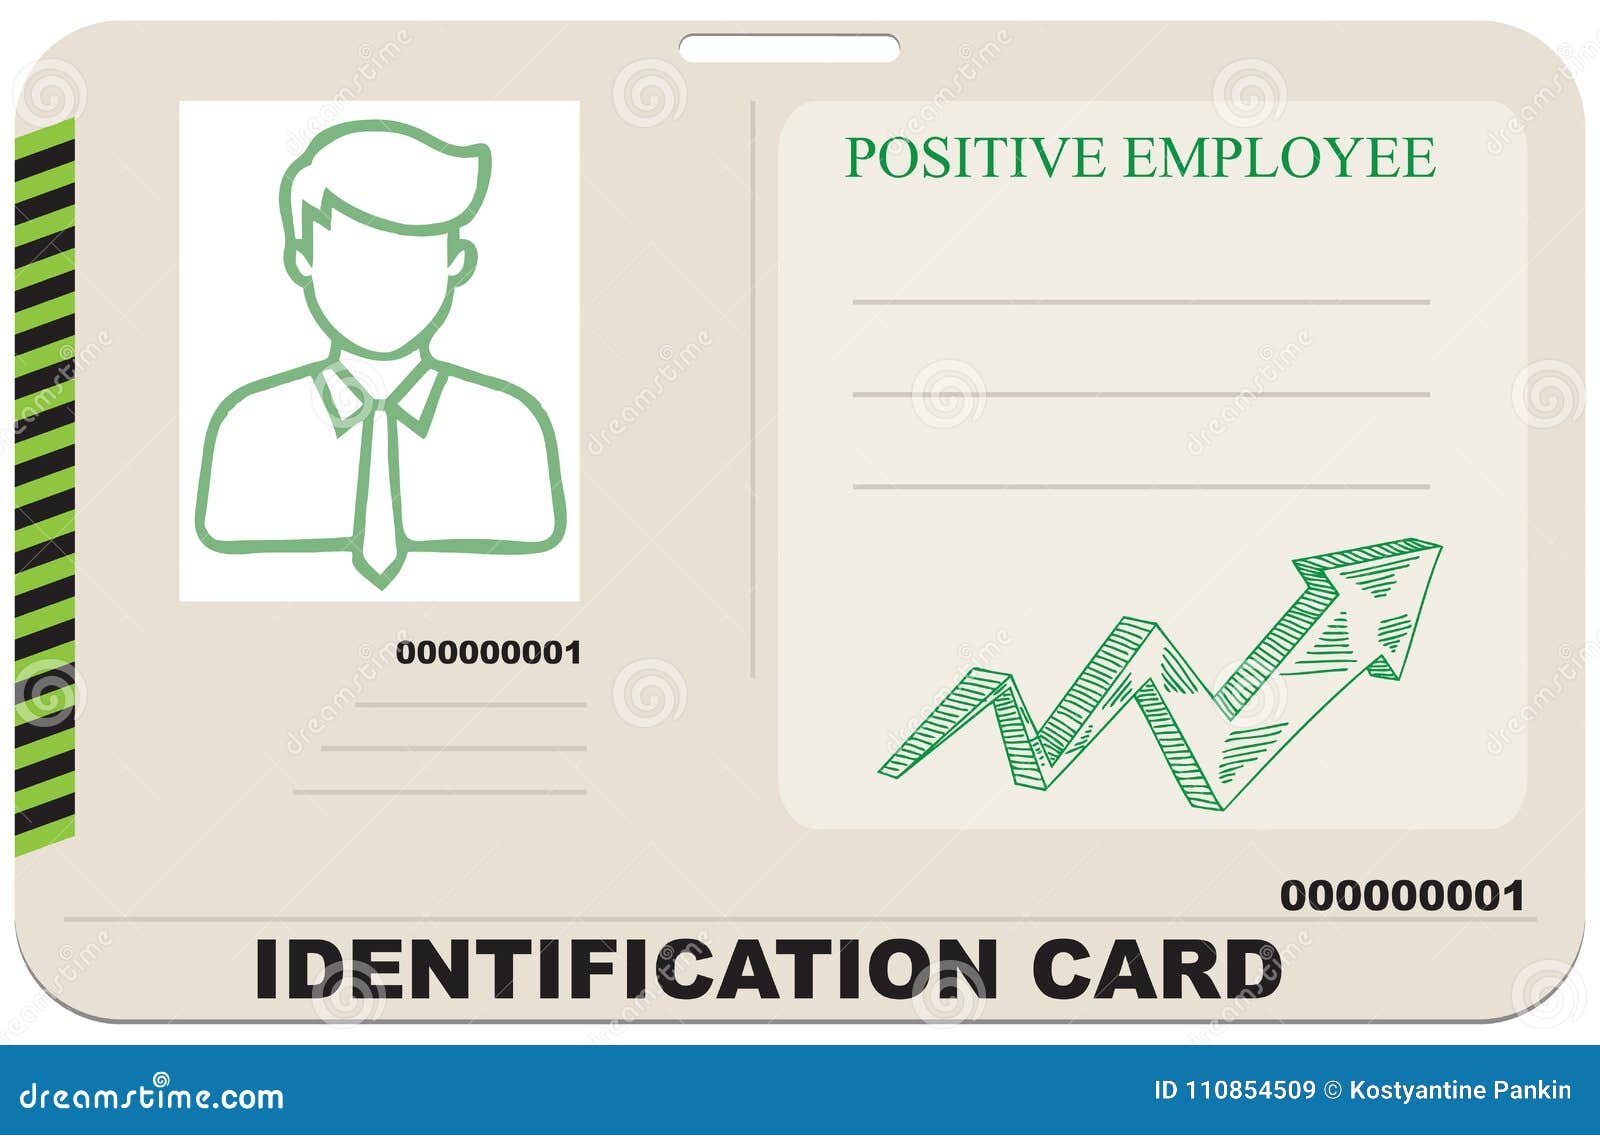 Identification Card For Positive Employee Stock Vector For Mi6 Id Card Template